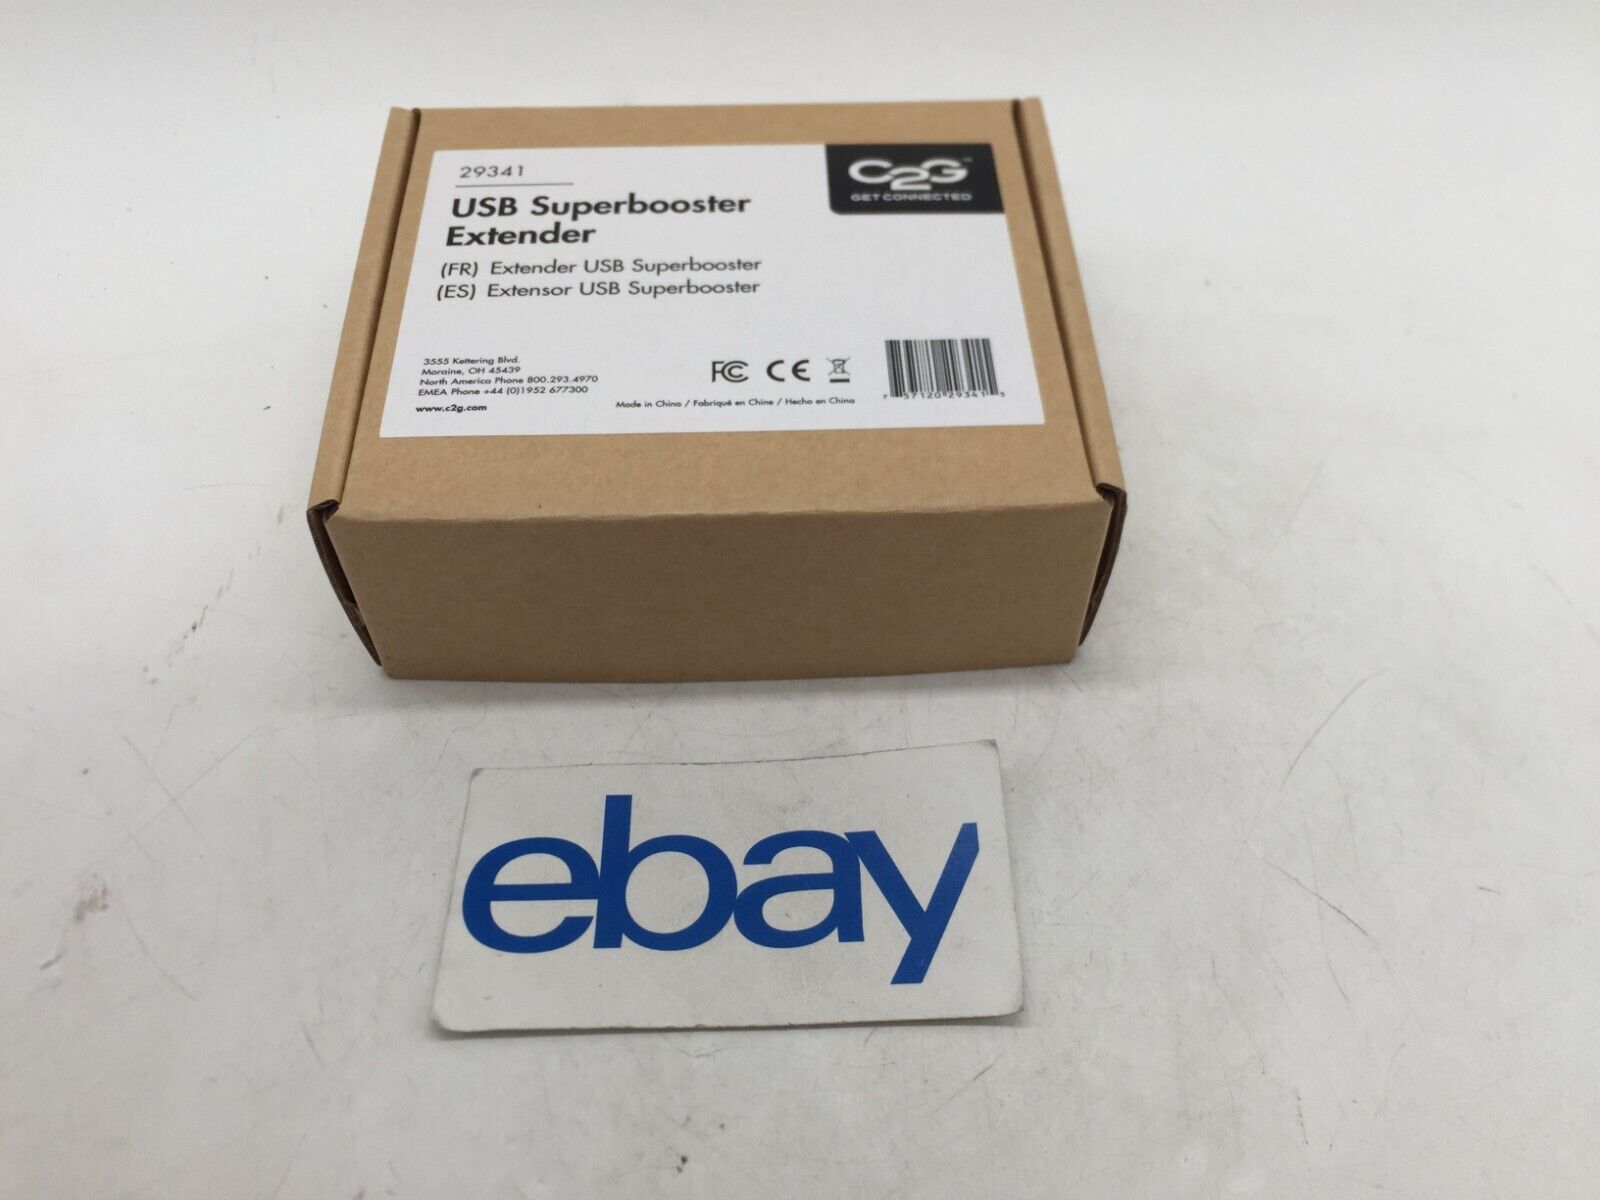 NEW C2G29341 USB Superbooster Extender CablesToGo Over Cat5 FREE S/H